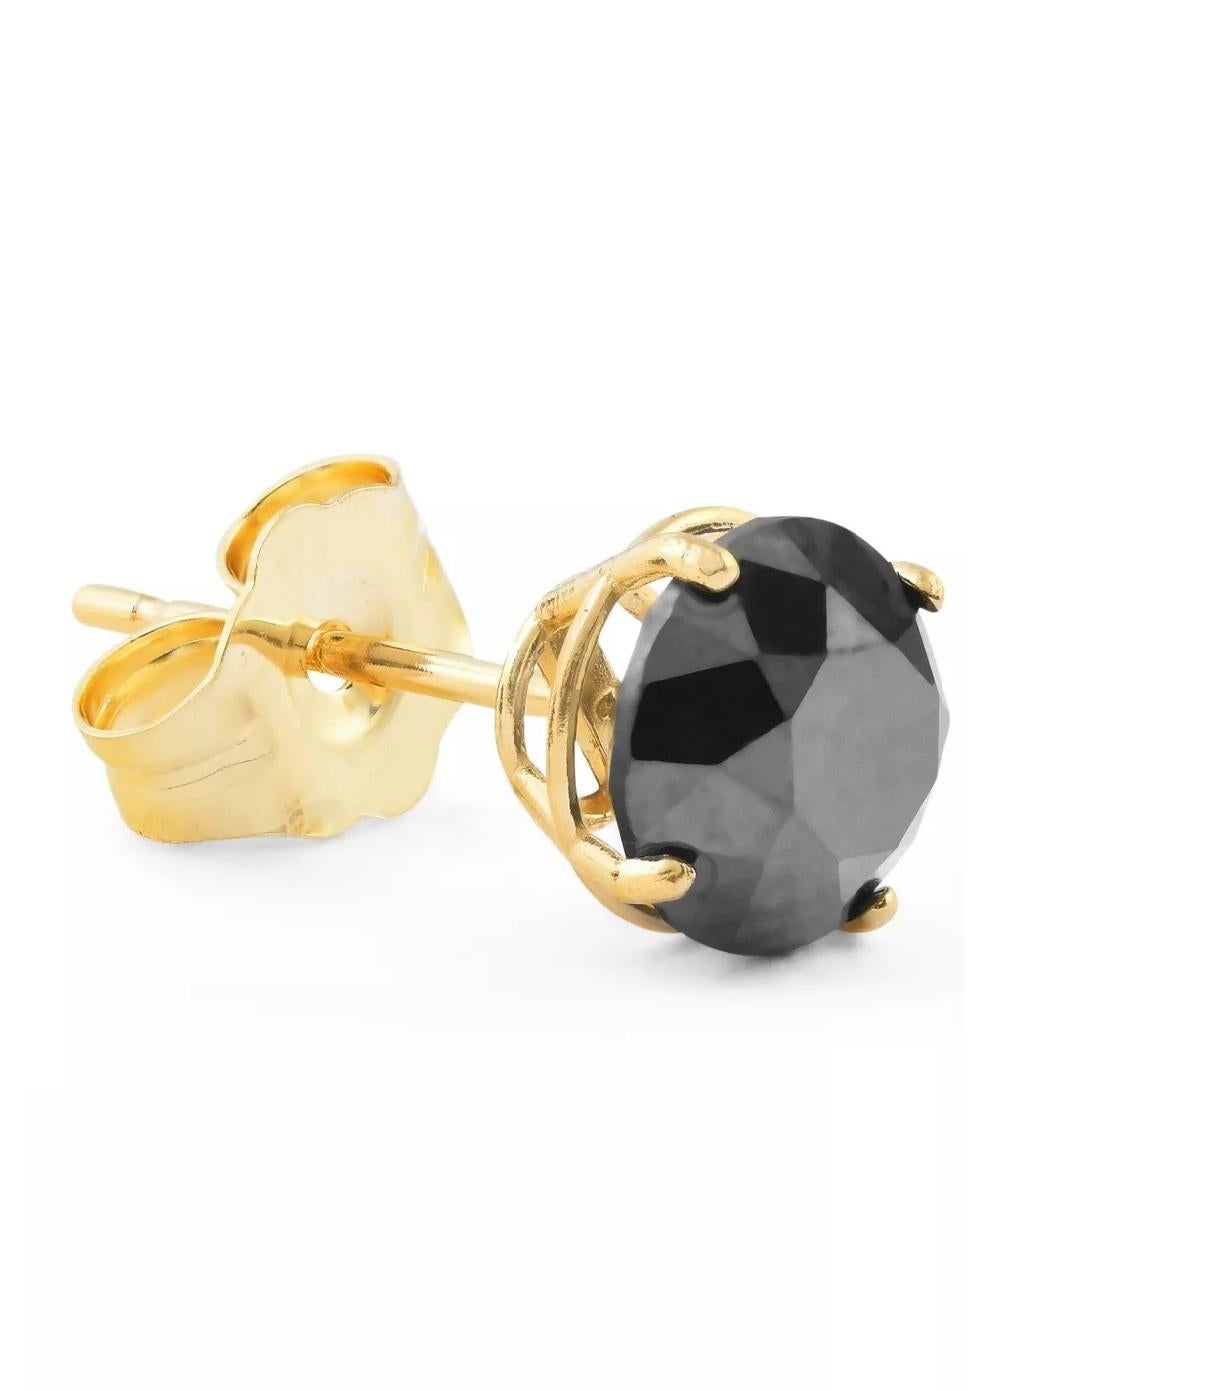 Contemporary 1.76 Carat Round Black Diamond Single Stud Earring for Men in 14 K Yellow Gold